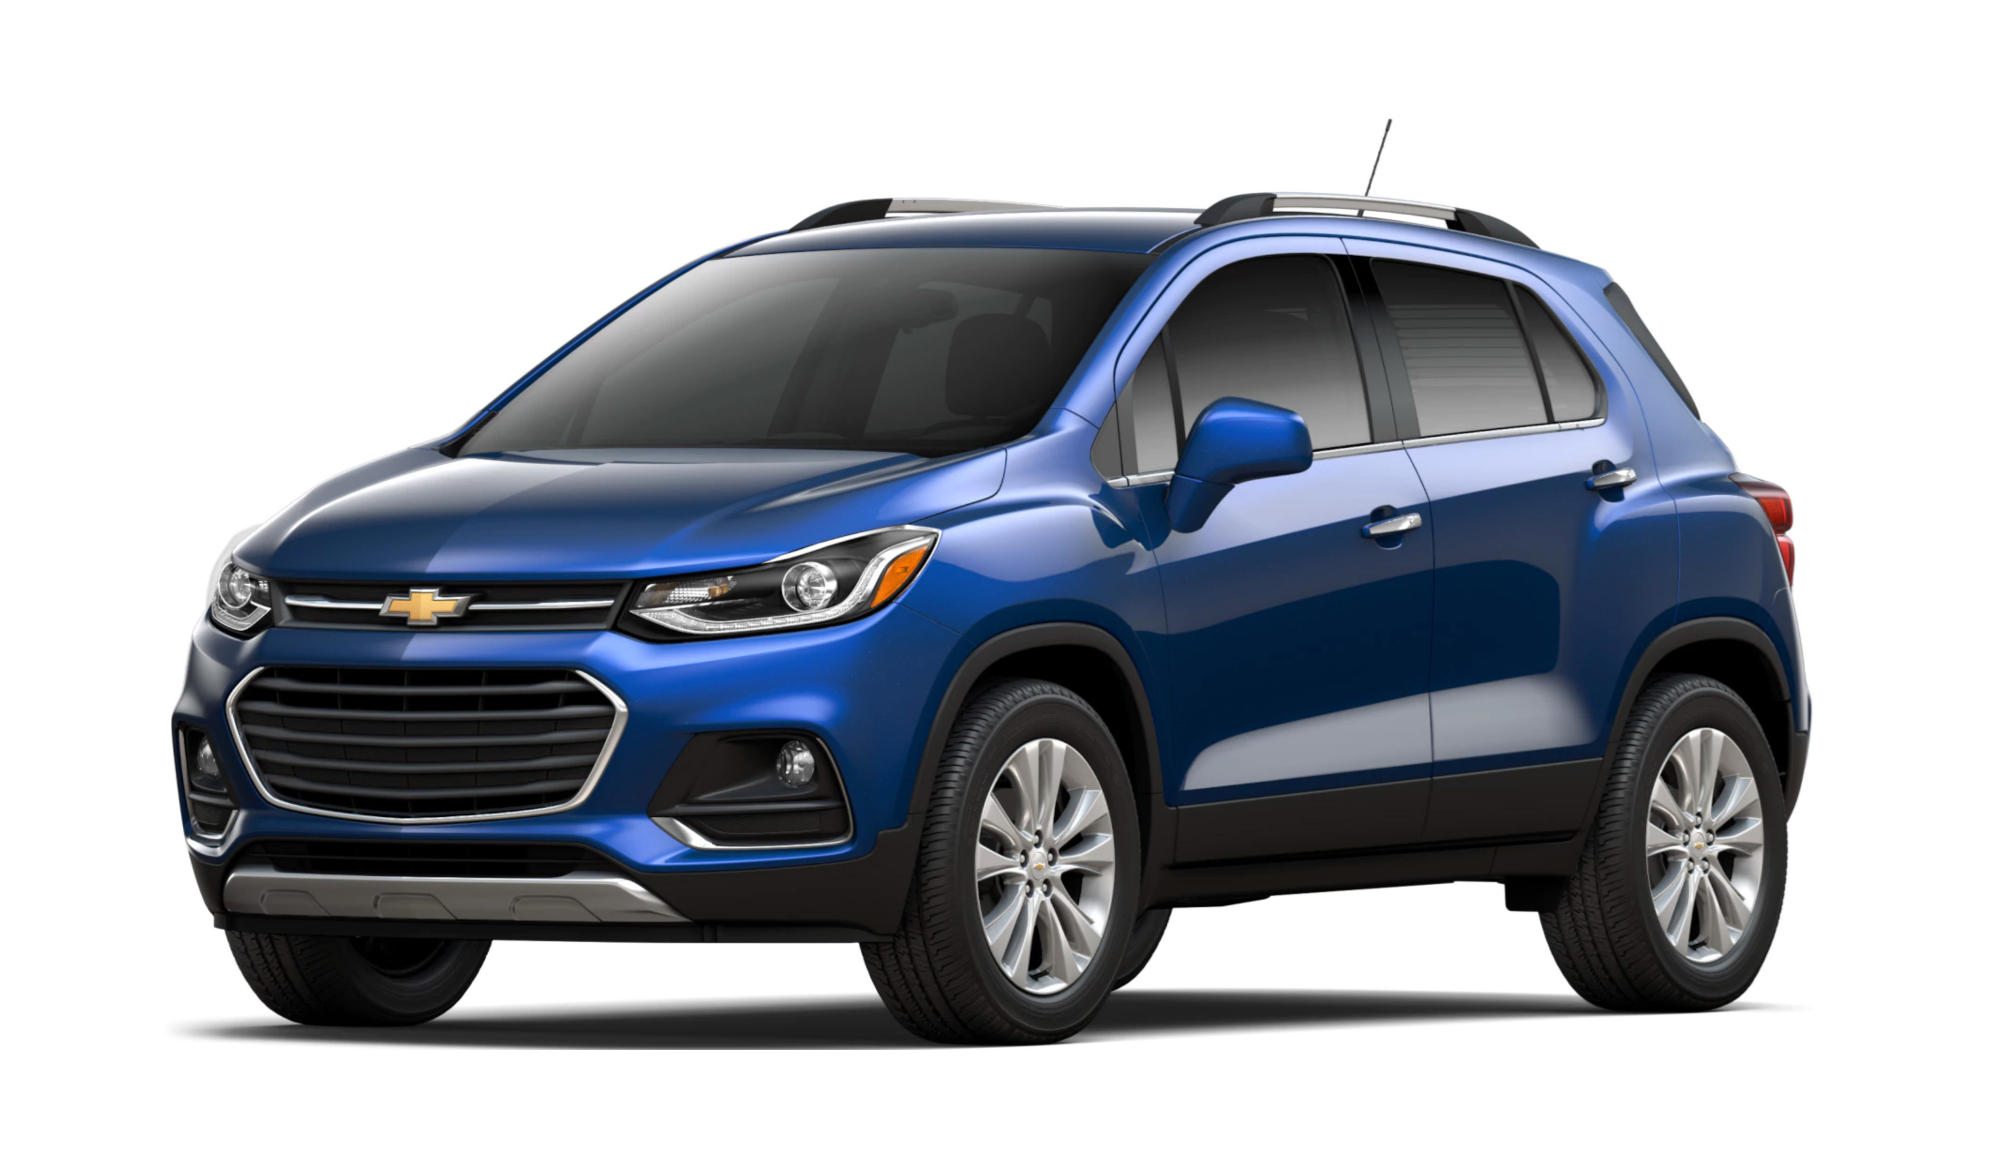 2021-chevrolet-trax-ls-full-specs-features-and-price-carbuzz